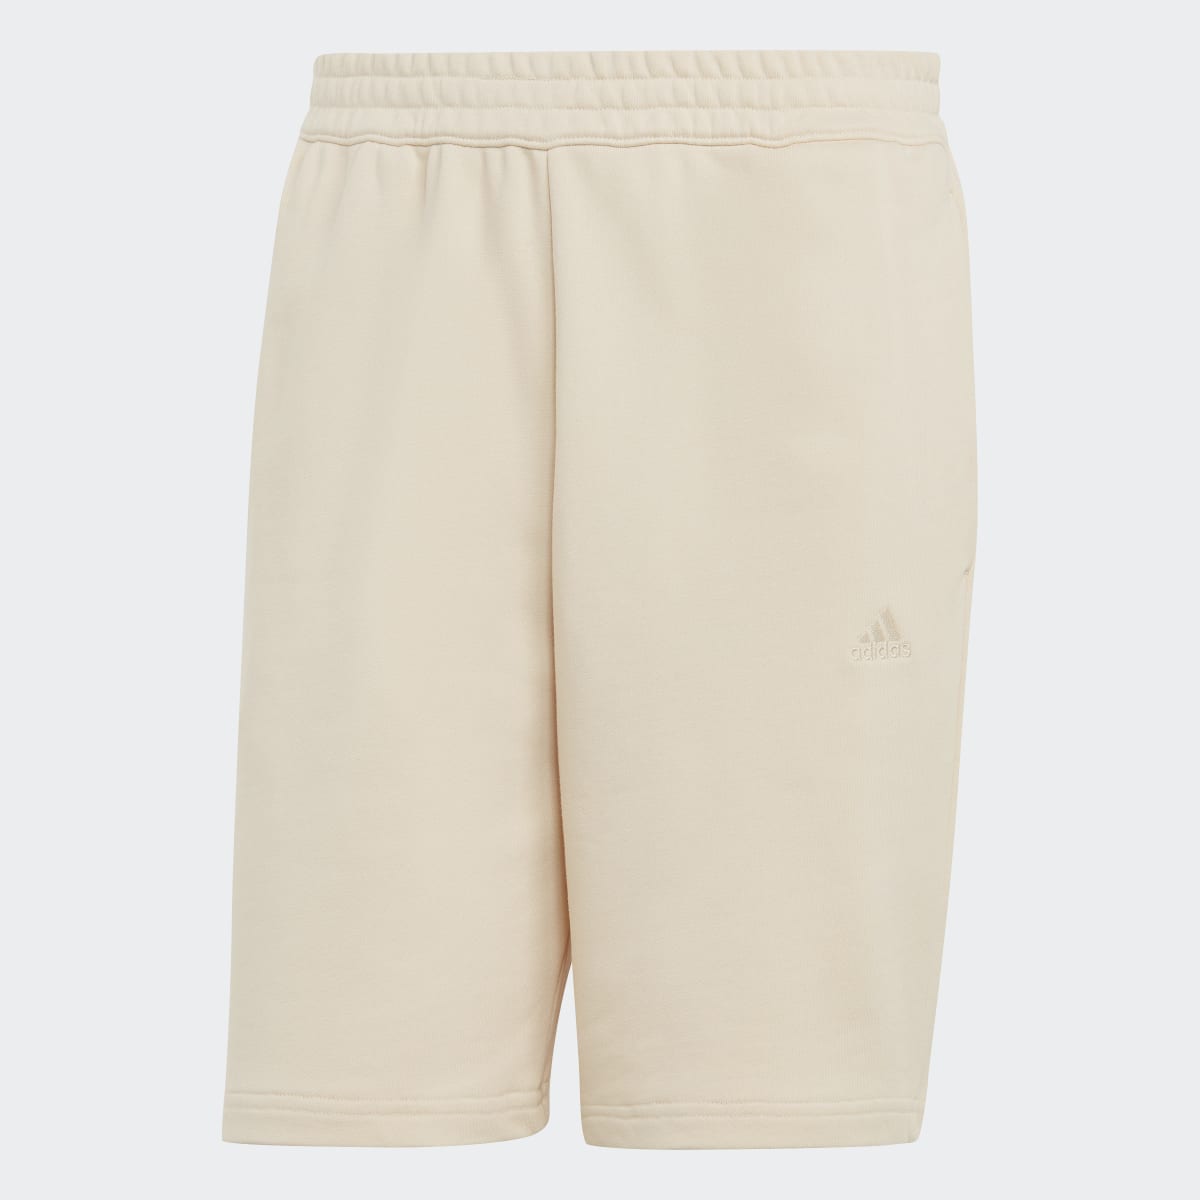 Adidas ALL SZN French Terry Shorts. 4